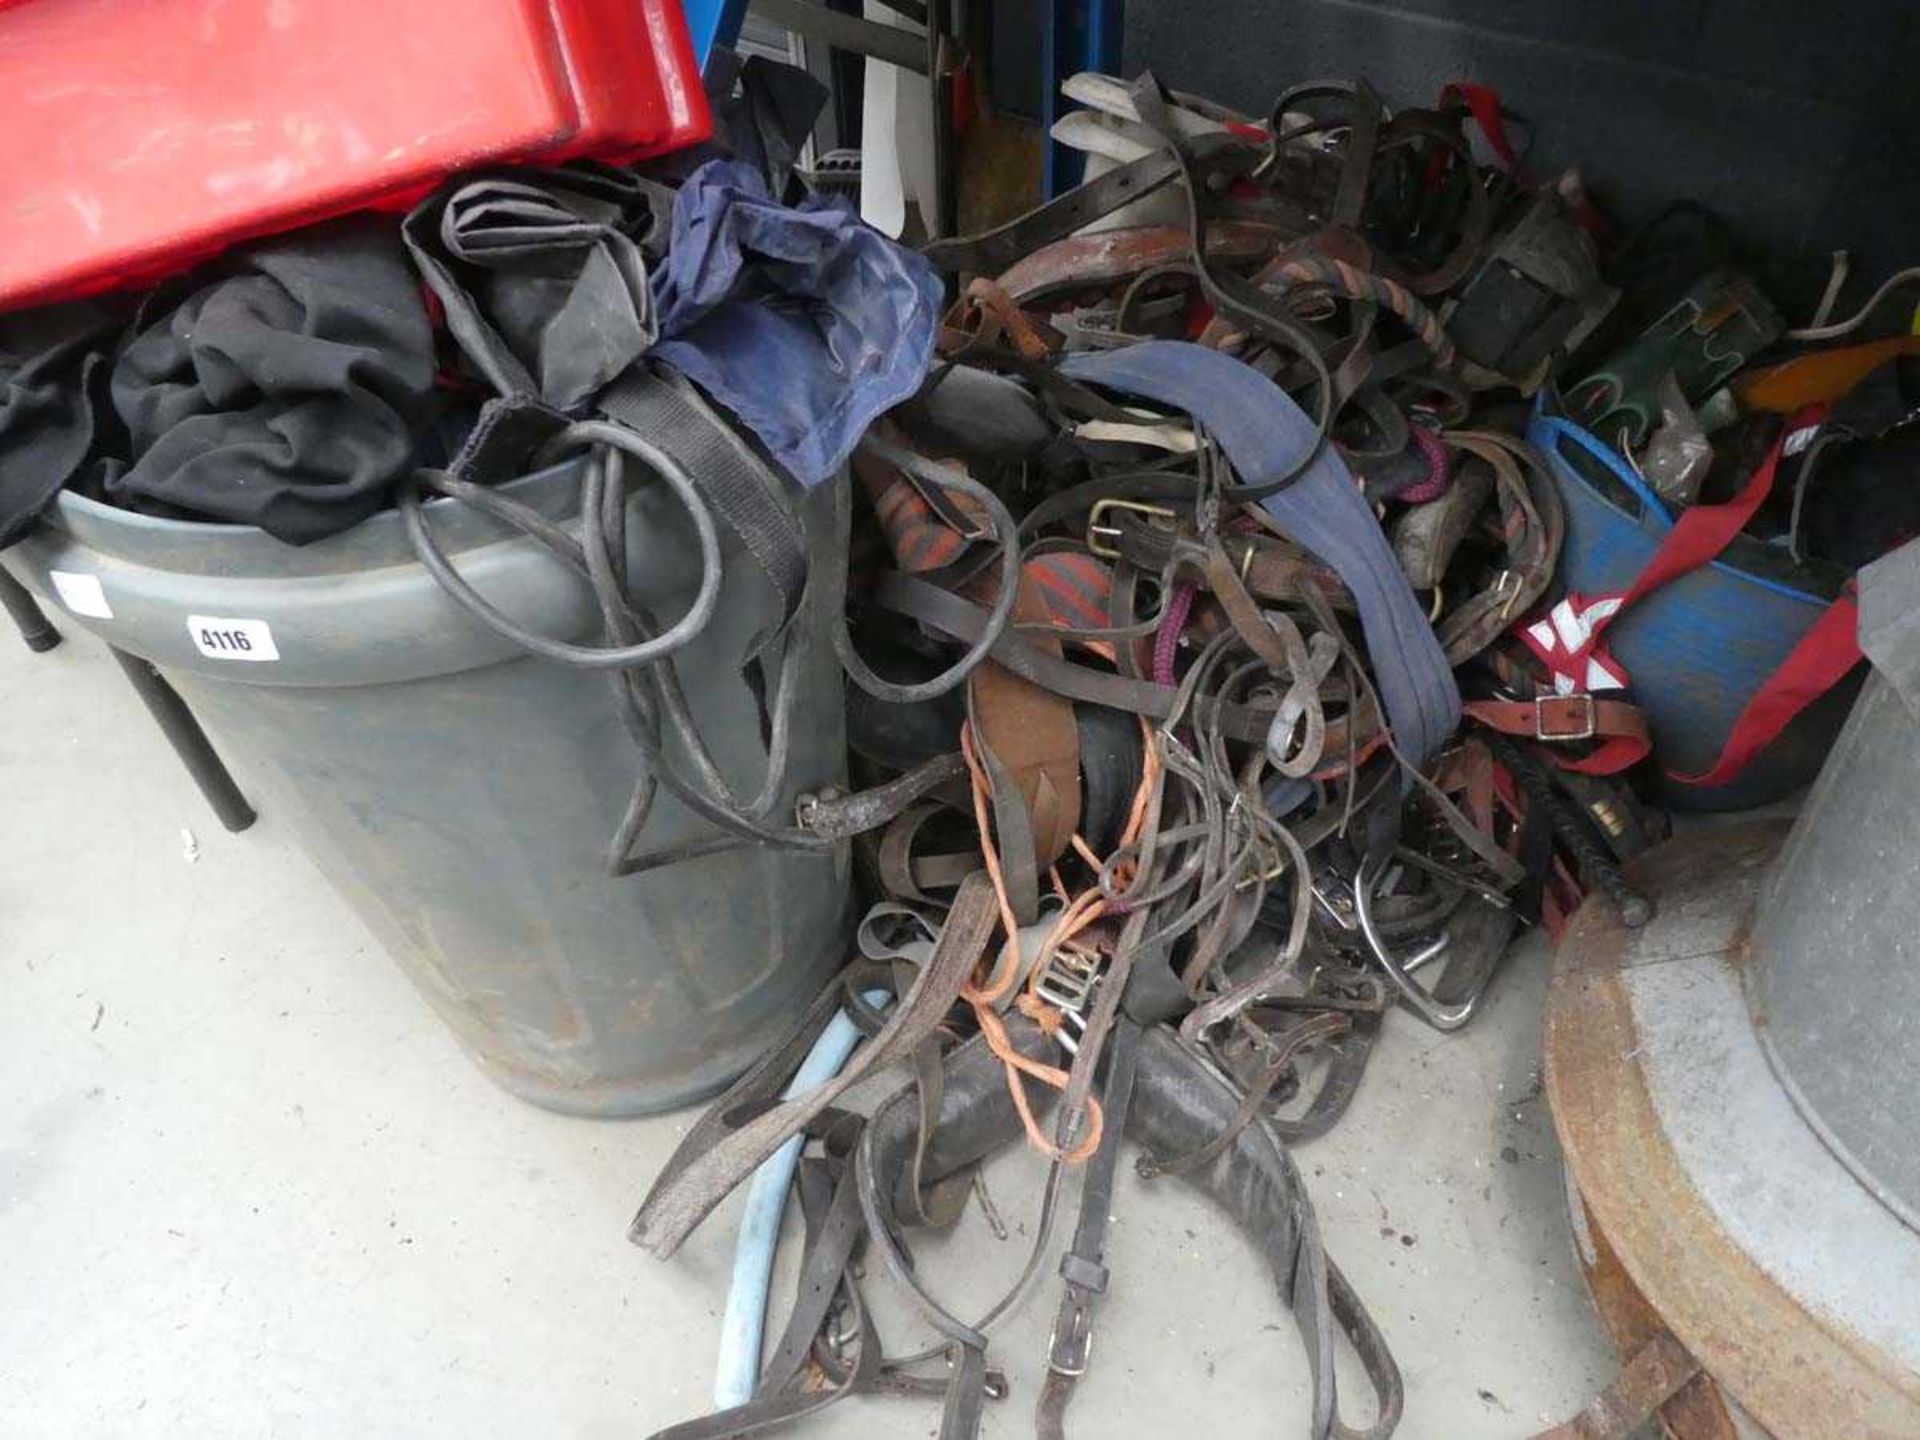 Underbay of horse tack incl. bits, clippers, straps, harnesses, etc.